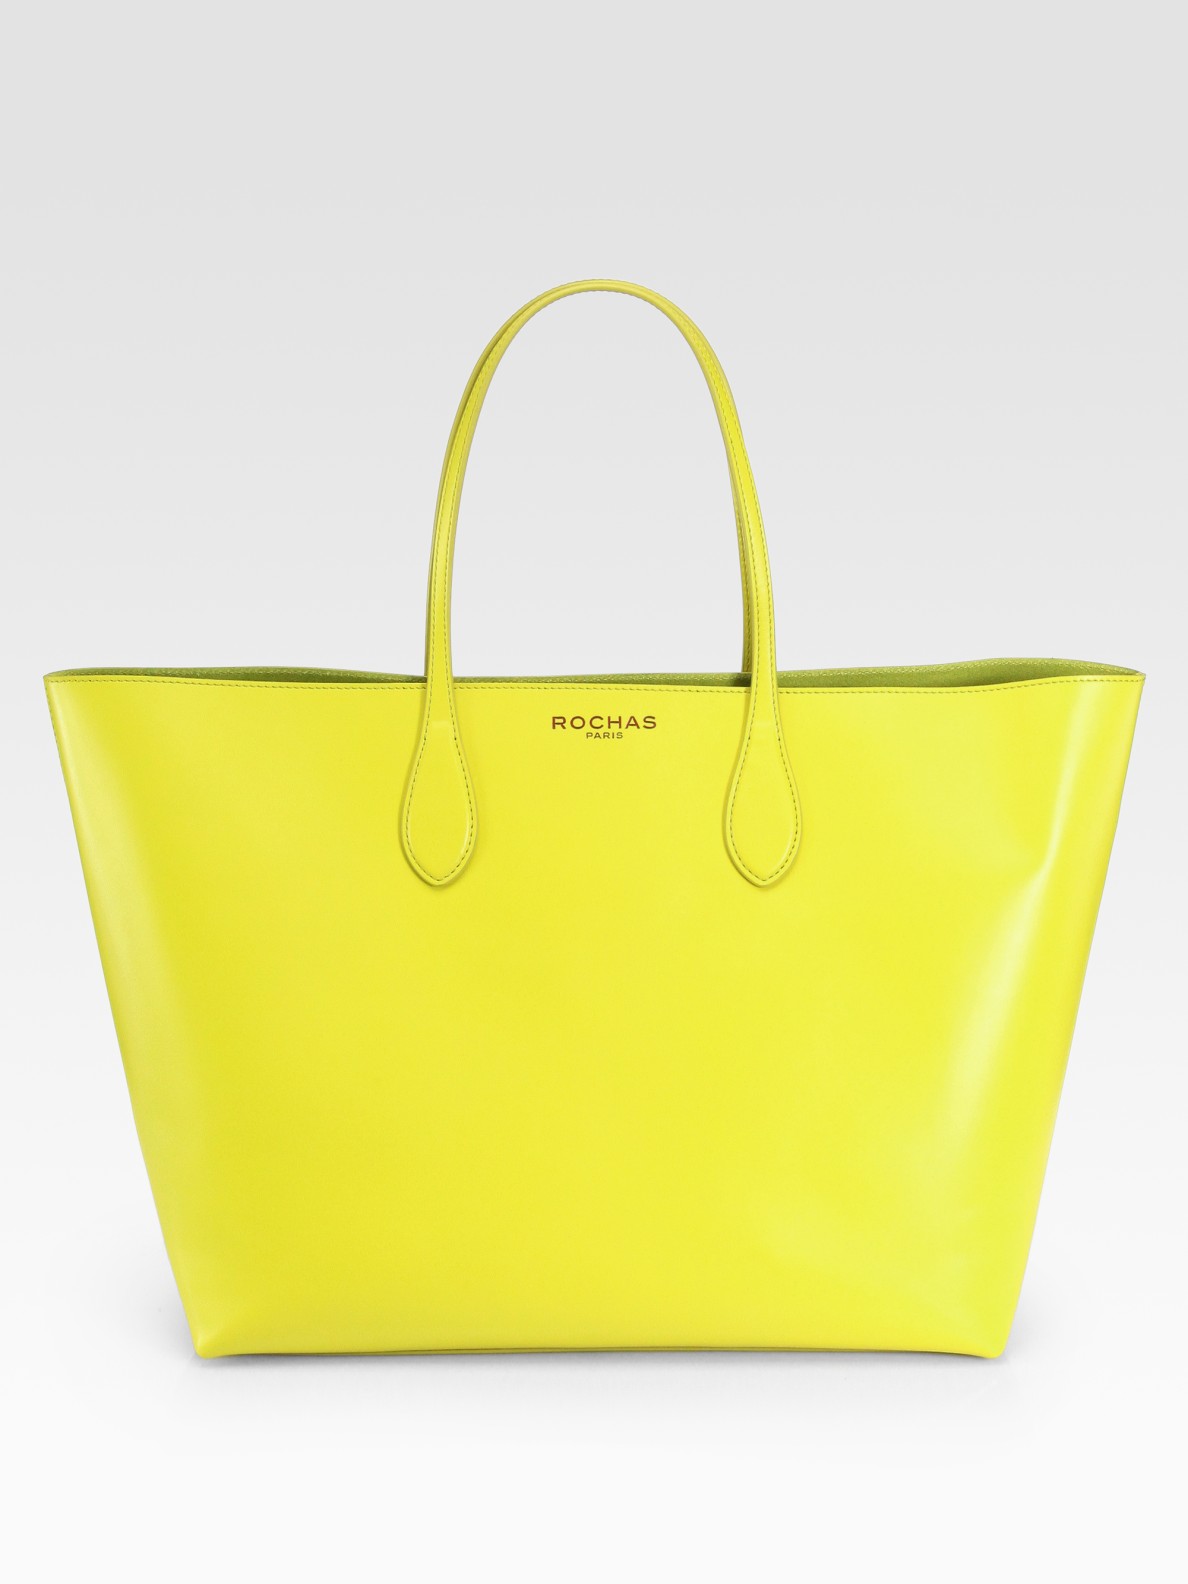 Rochas Rocahs Giallo Tote Bag in Yellow | Lyst